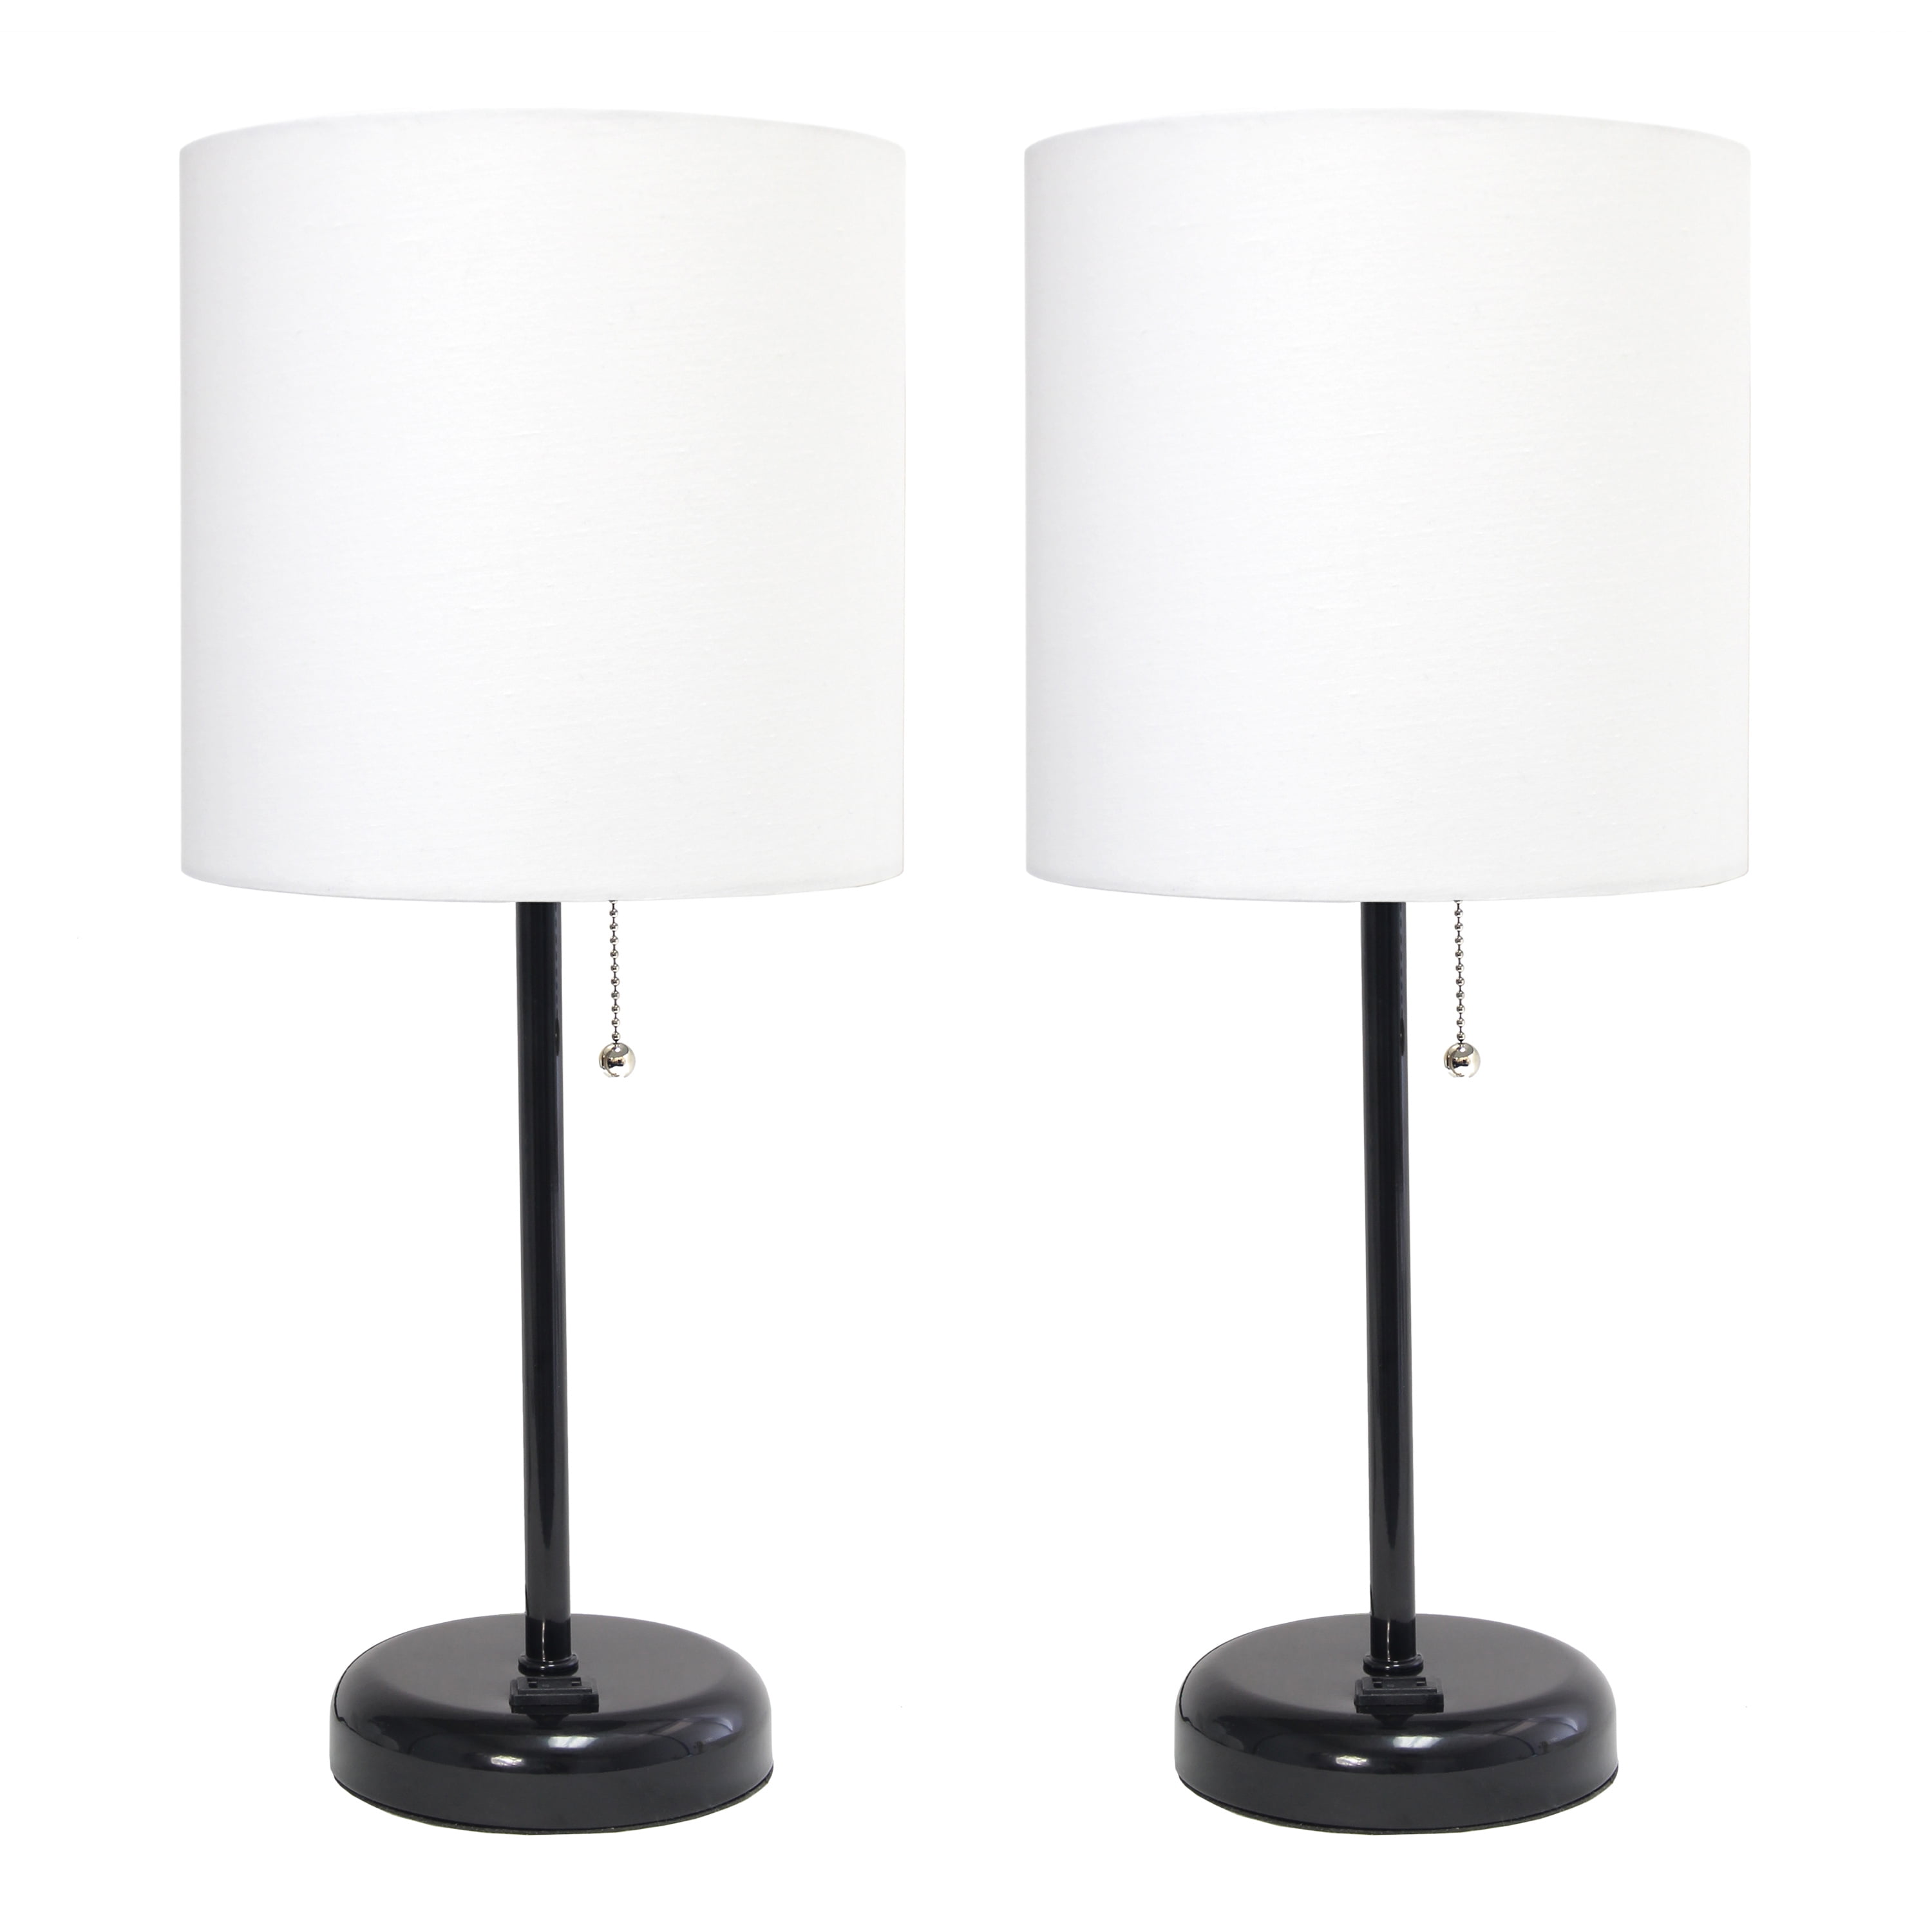 Lc2001-baw-2pk Black Stick Table Lamp With Charging Outlet & Fabric Shade, White - Set Of 2